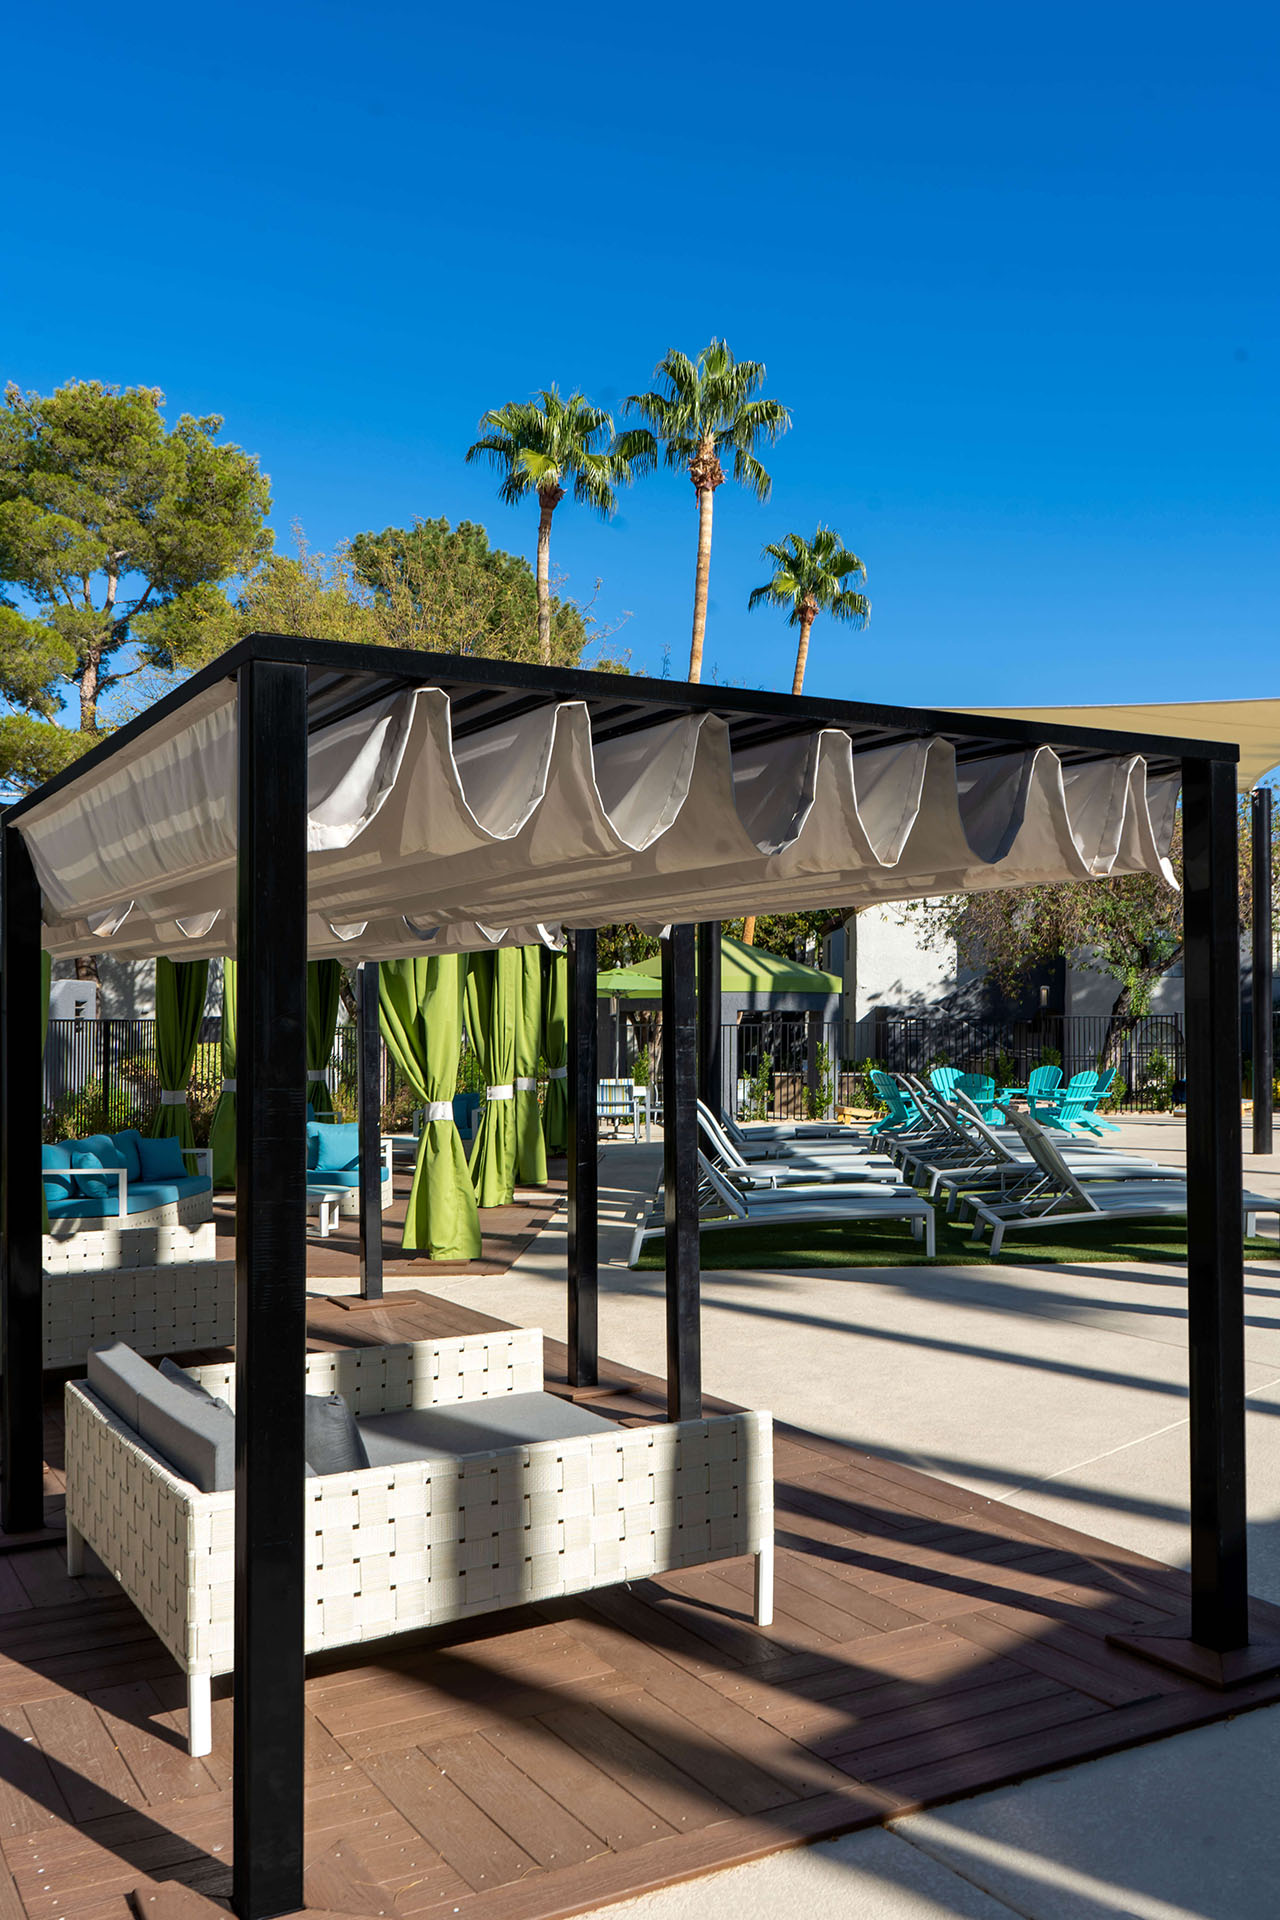 Poolside Custom Cabanas Designed and Fabricated by Metro Awnings of Southern Nevada